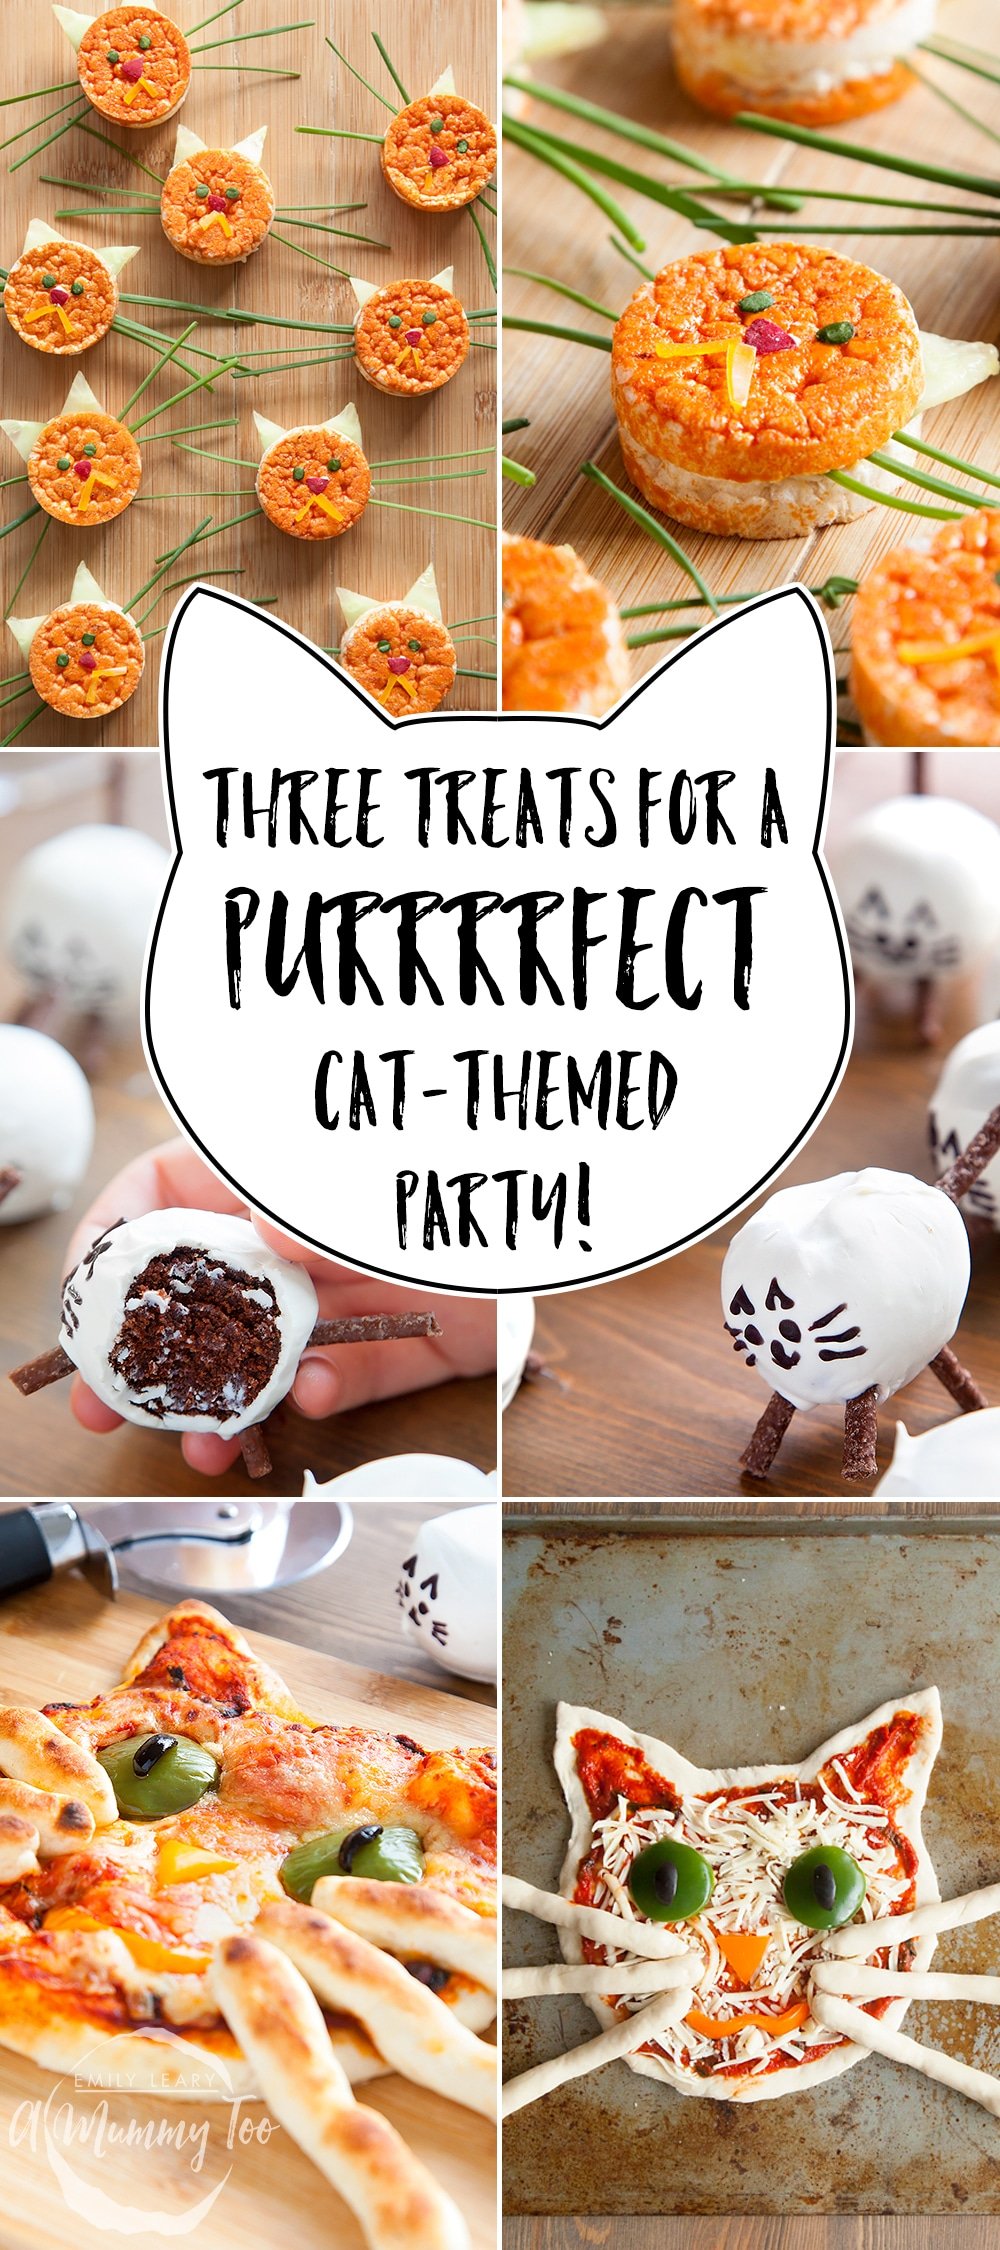 A cat themed party with kittenlike sandwiches, happy cat pizza and